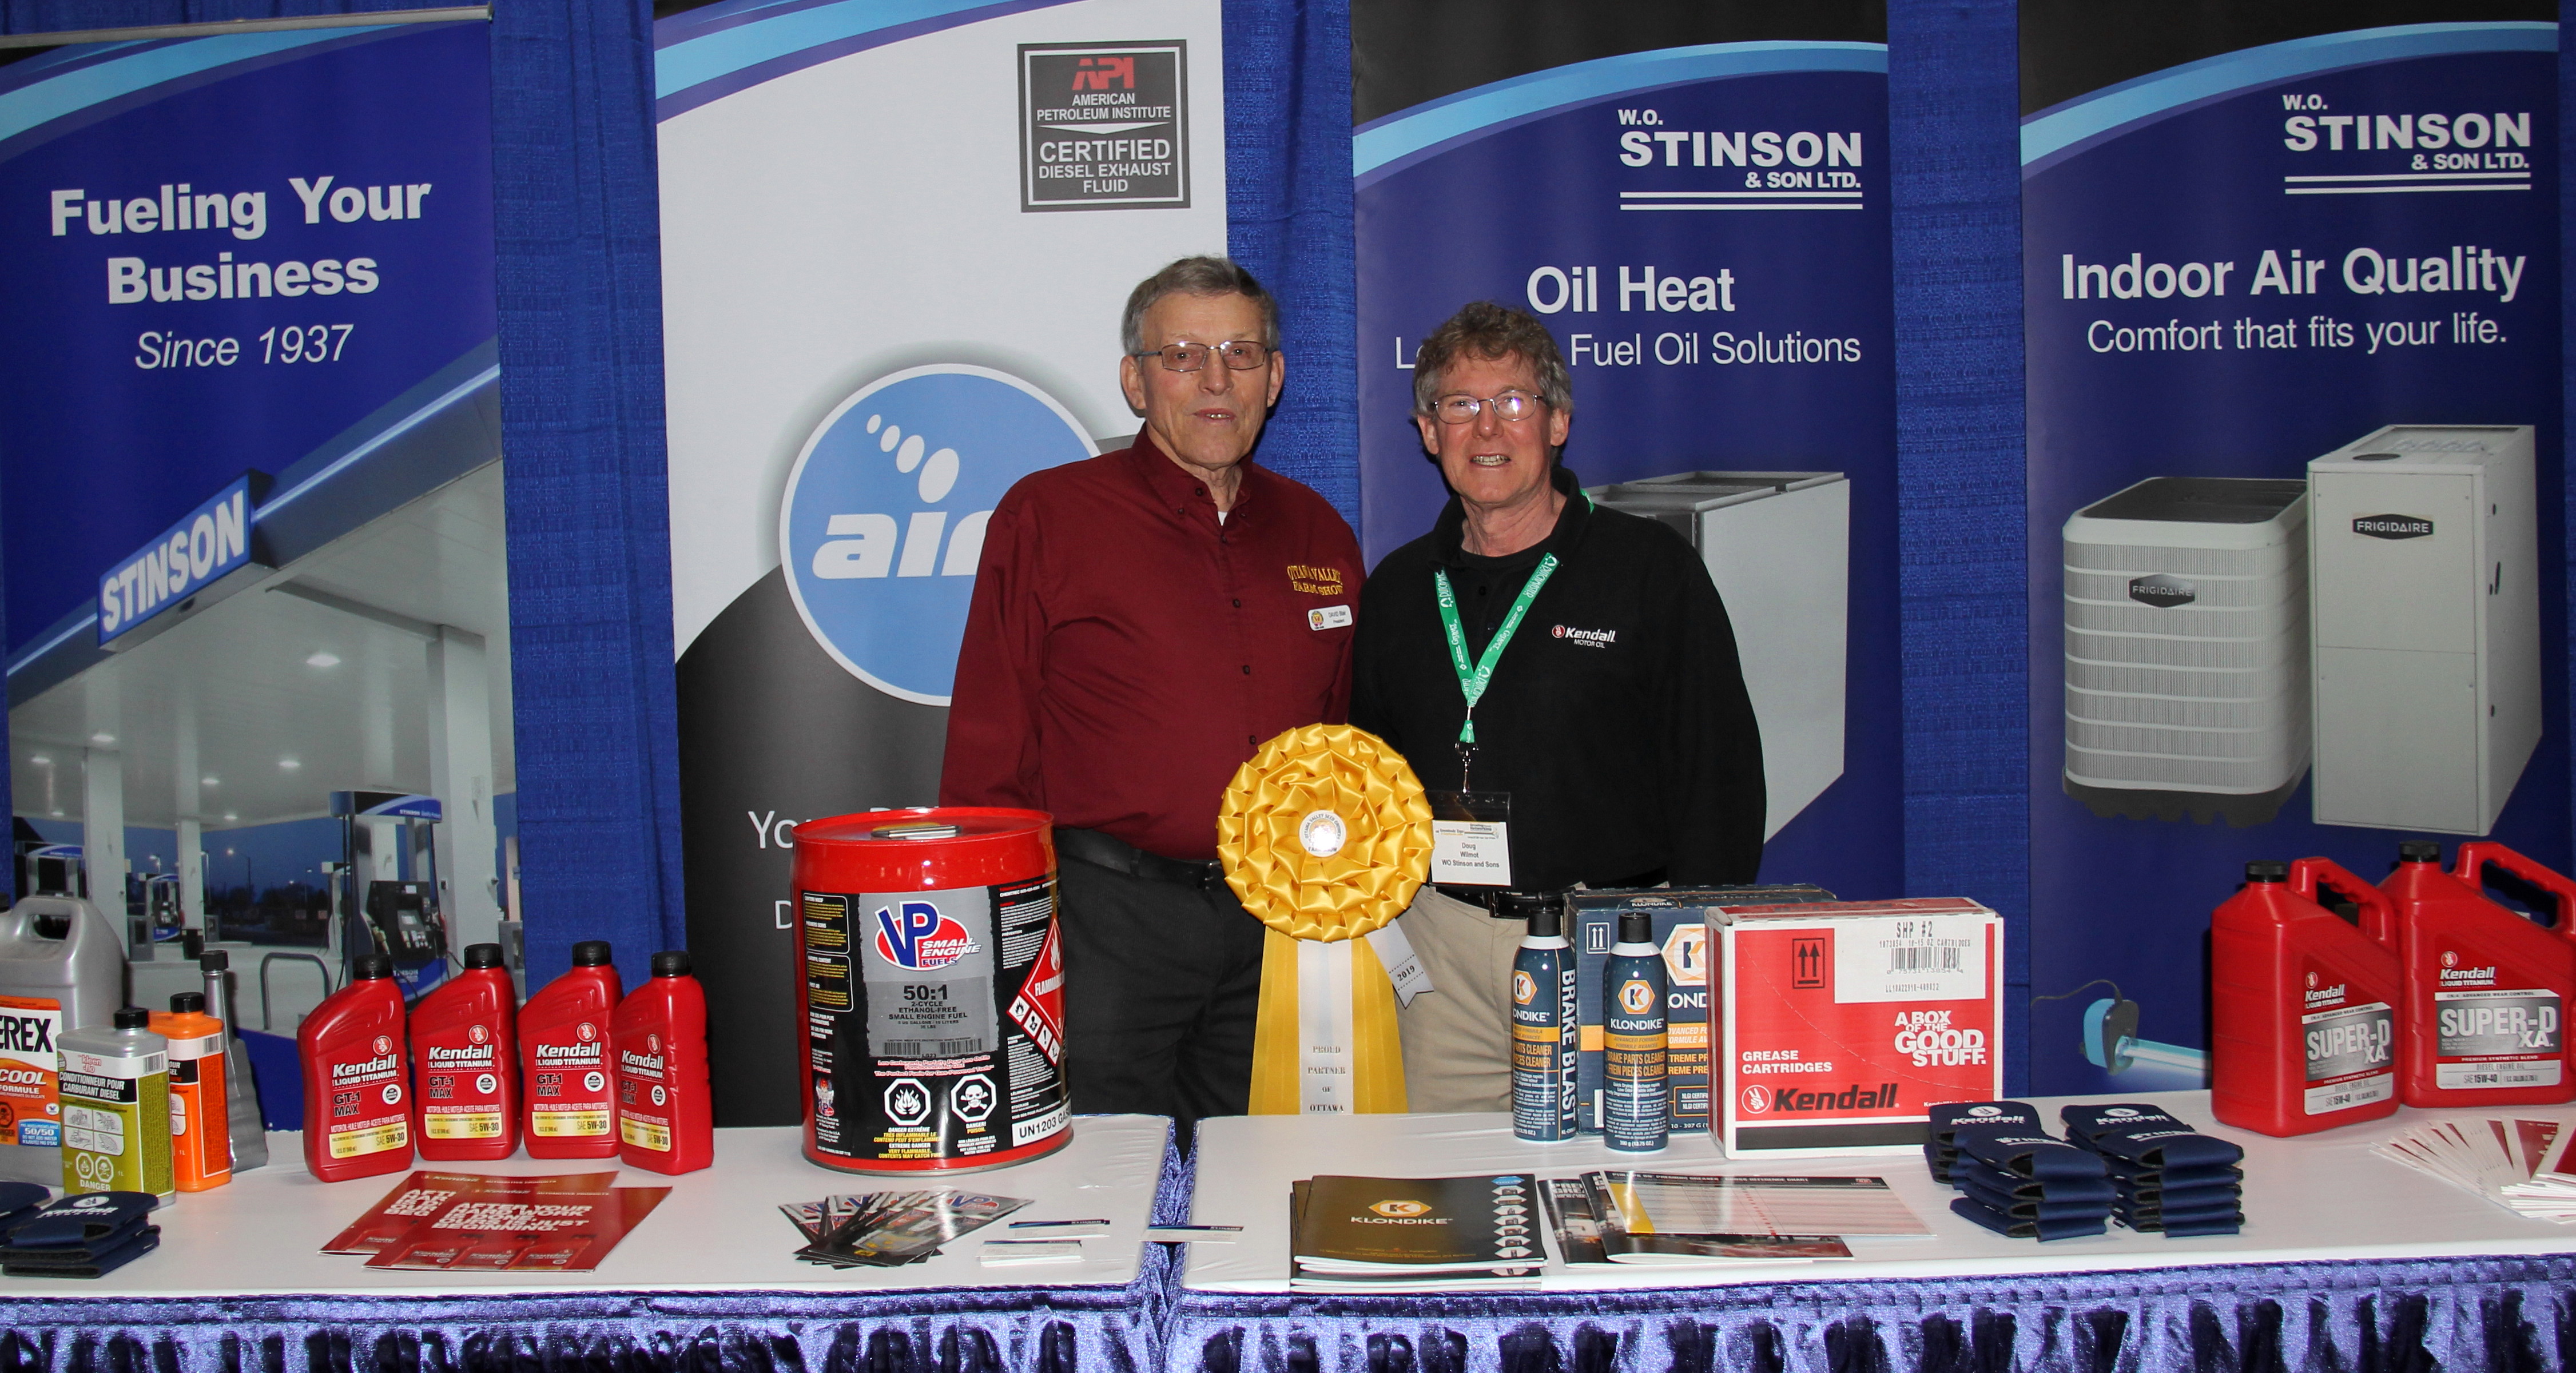 Two people standing in front of a table with oil heat products.